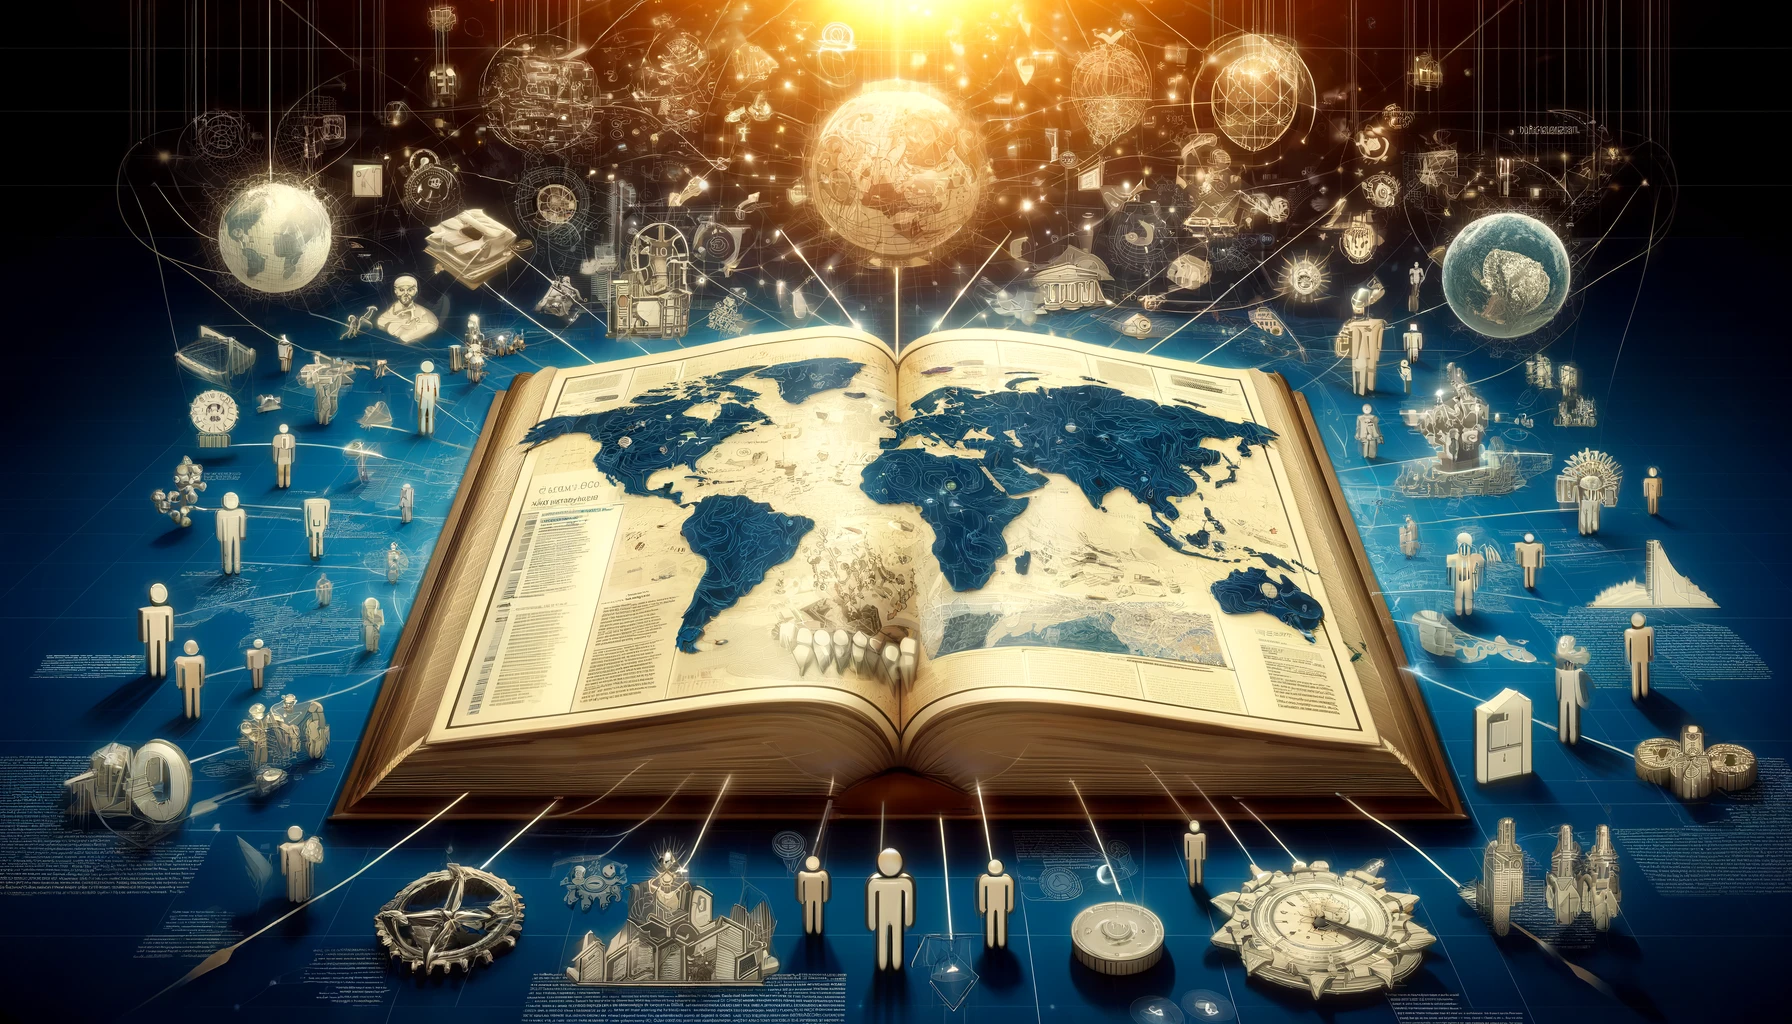 An open book displays a world map and various political system icons, surrounded by digital networks.